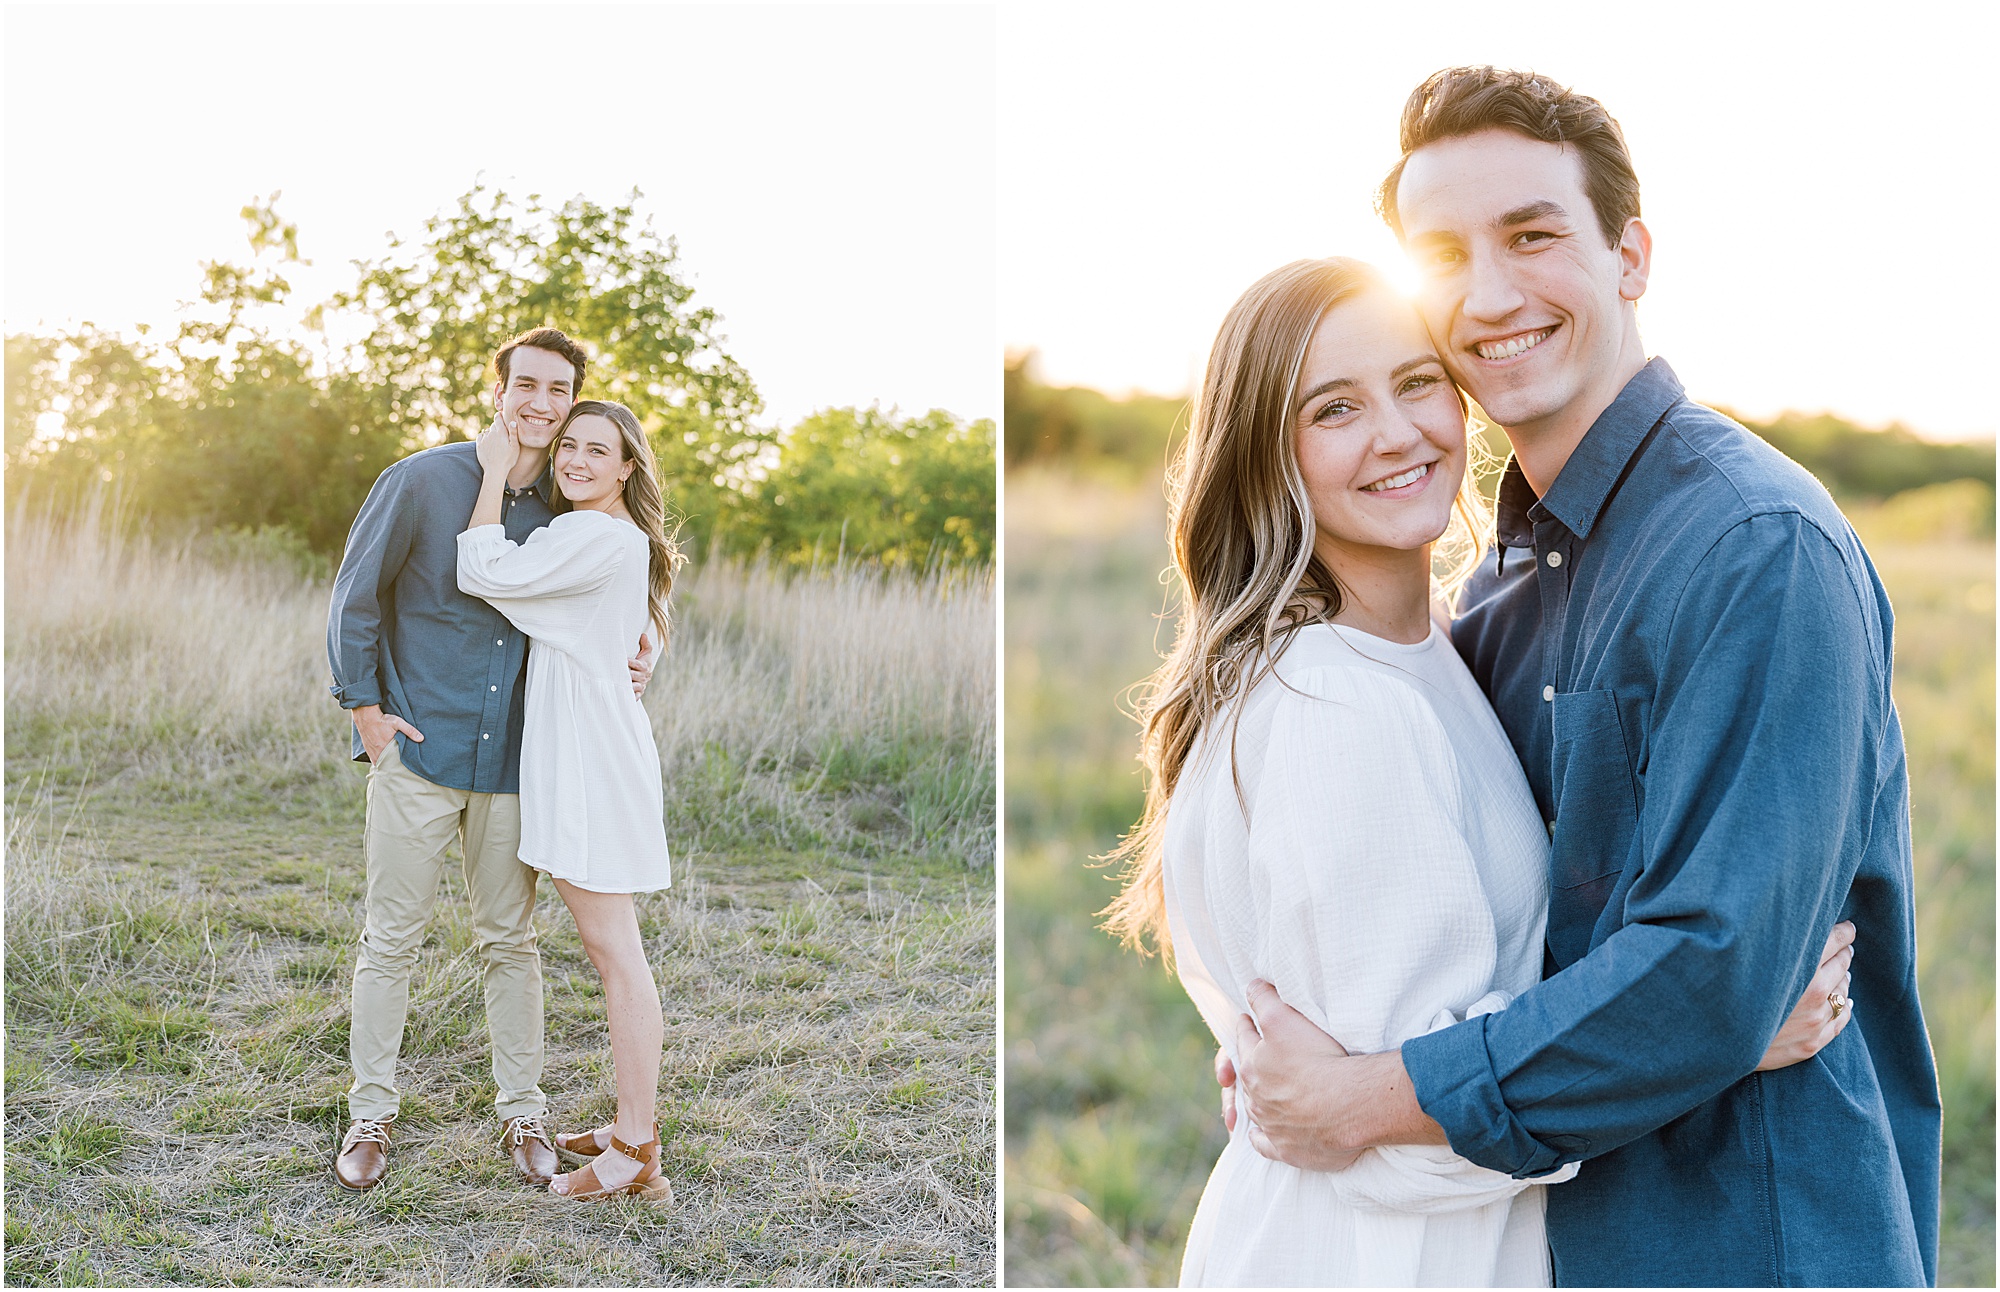 Dallas, Texas Engagement Session | Blue Hour Engagement Photos | Outdoor Engagement Session | Texas Wedding Photographer | Bailee Starr Photography